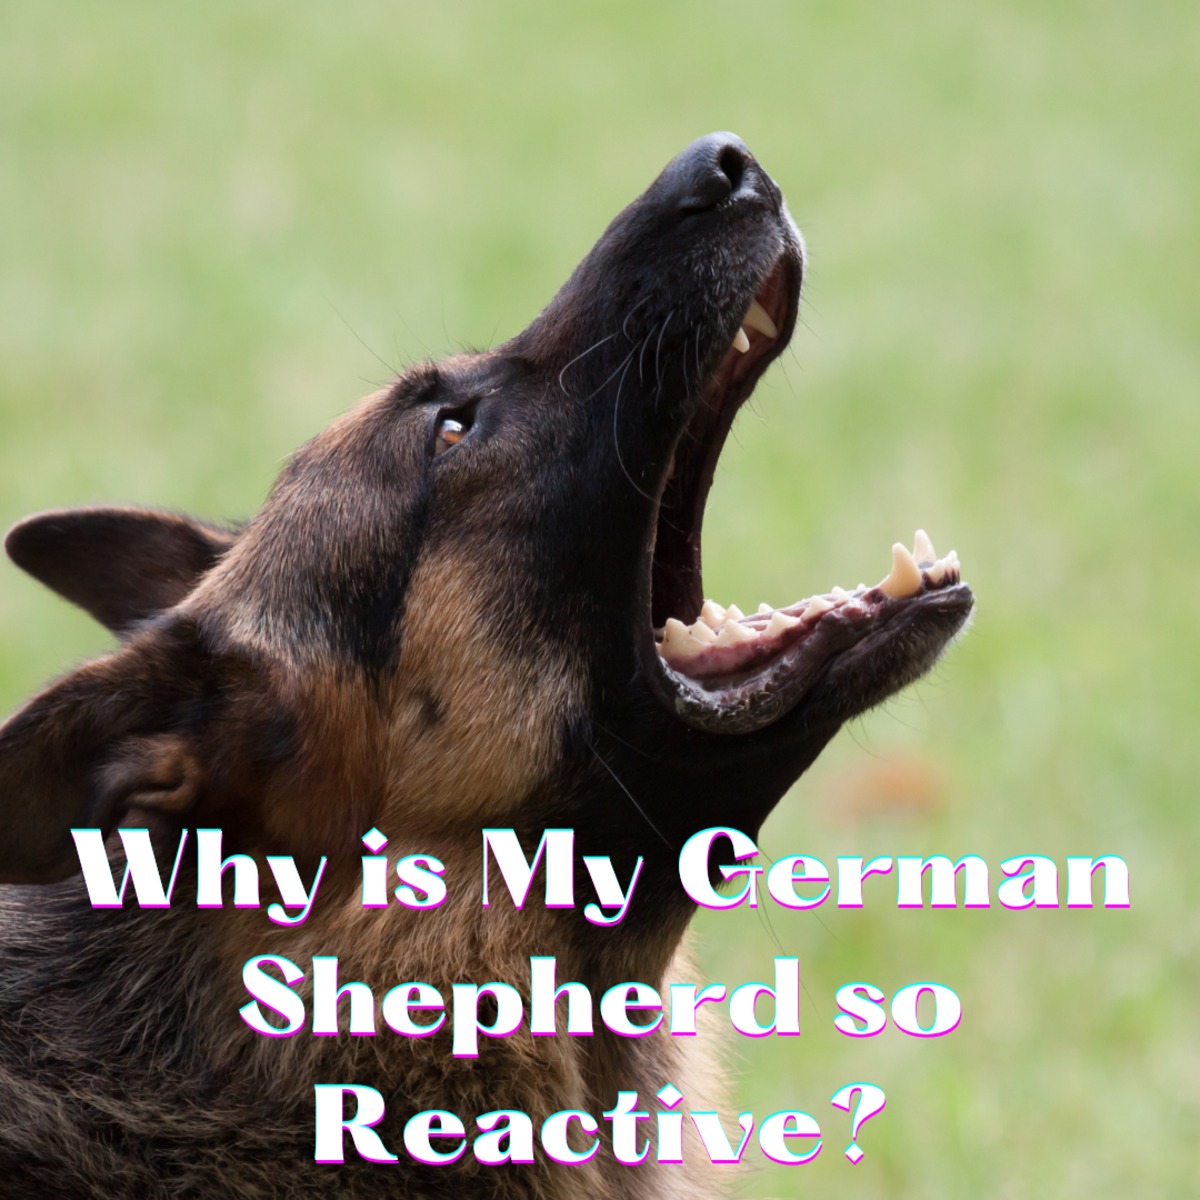 Why Is My German Shepherd So Reactive? (And What Can I Do?)